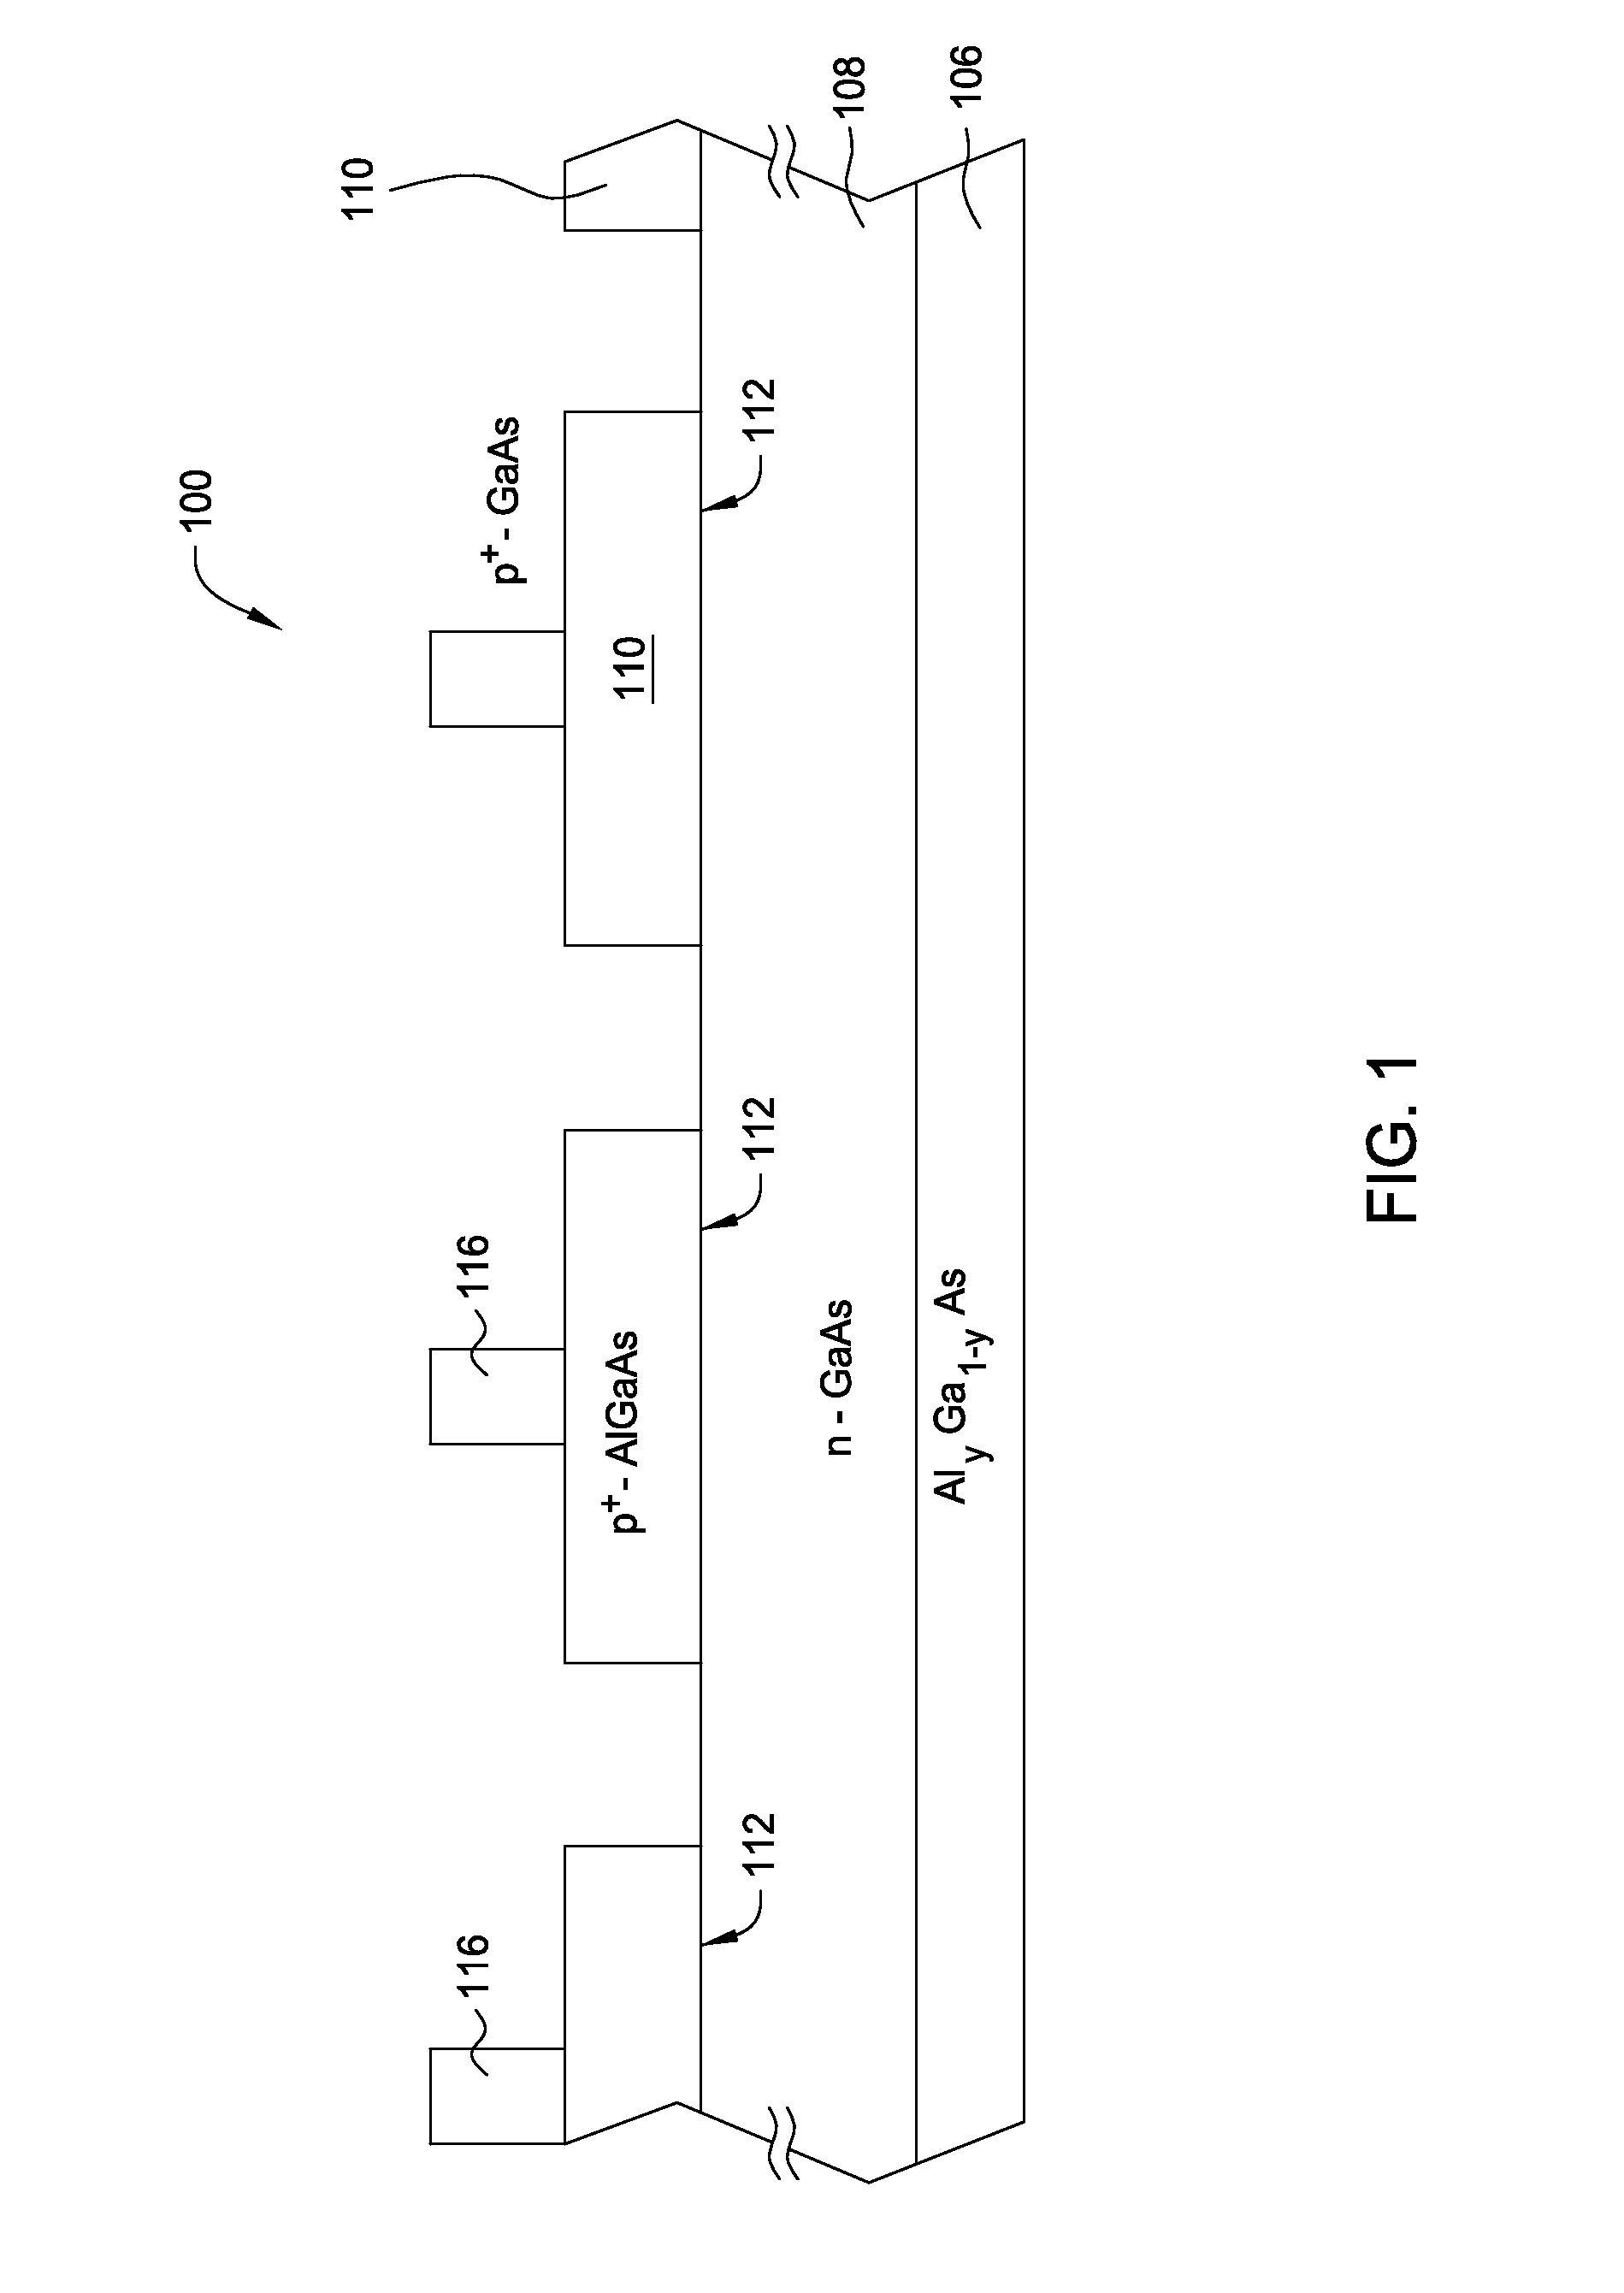 Integration of a photovoltaic device